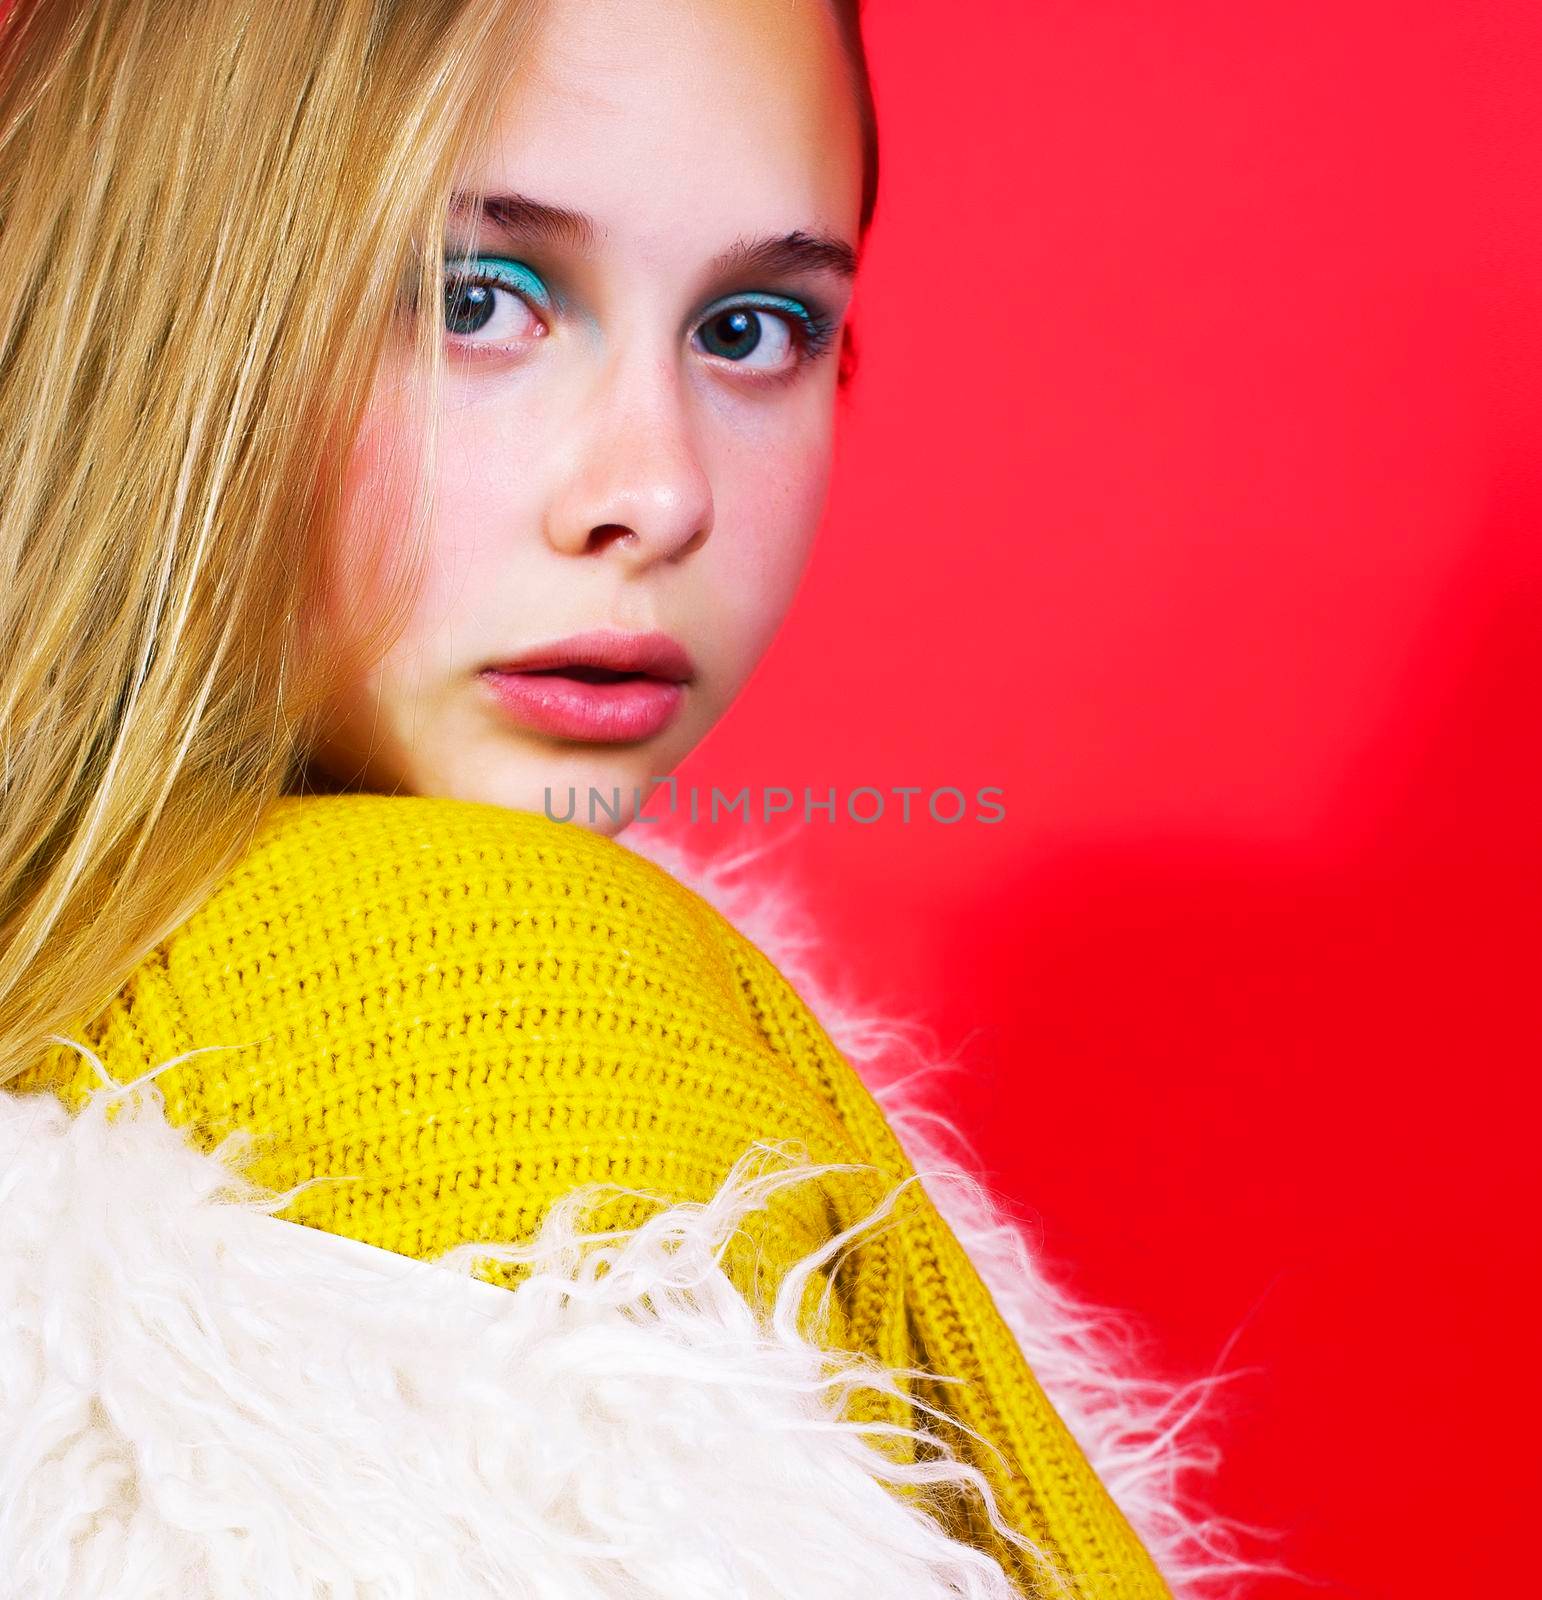 young pretty emitonal posing teenage girl on bright red background, happy smiling lifestyle people concept close up